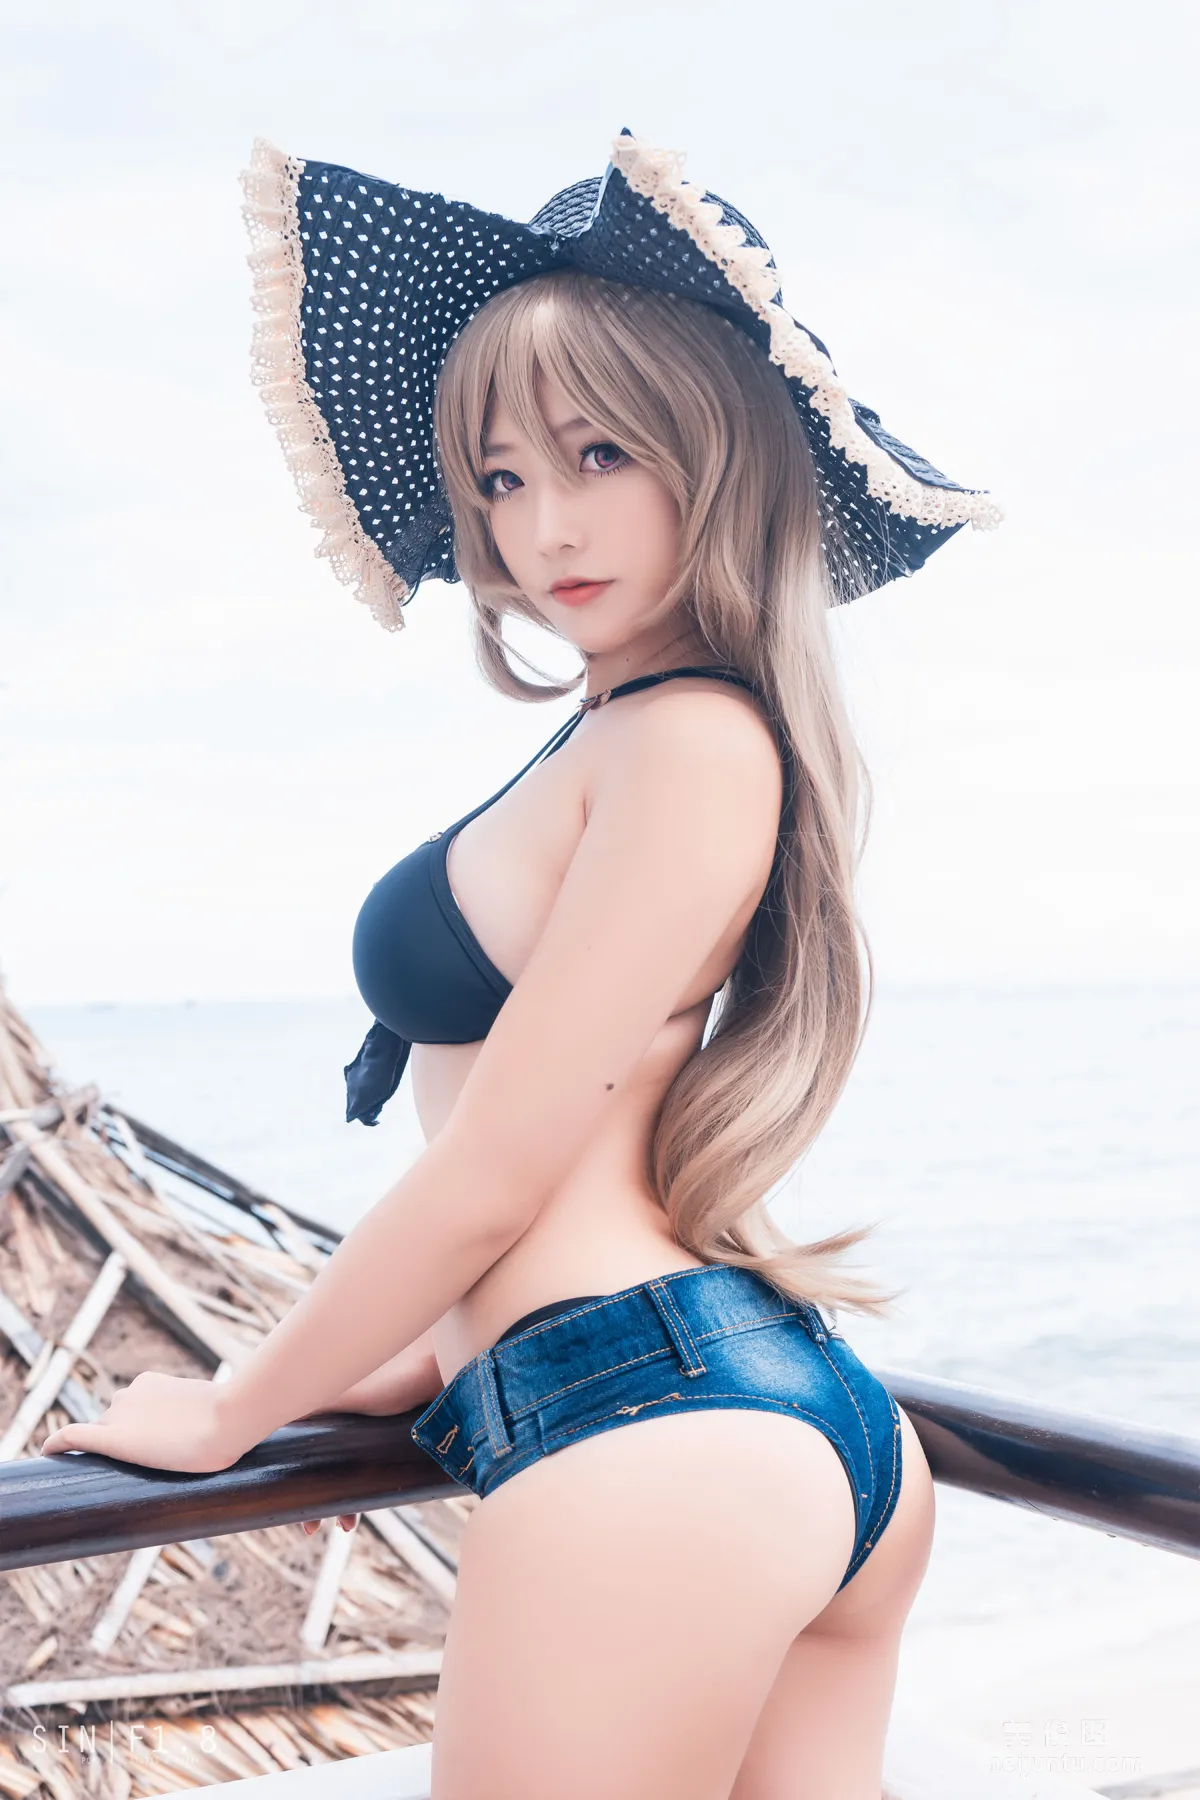 [COS福利] Messie Huang - Jean Bart swimsuit8